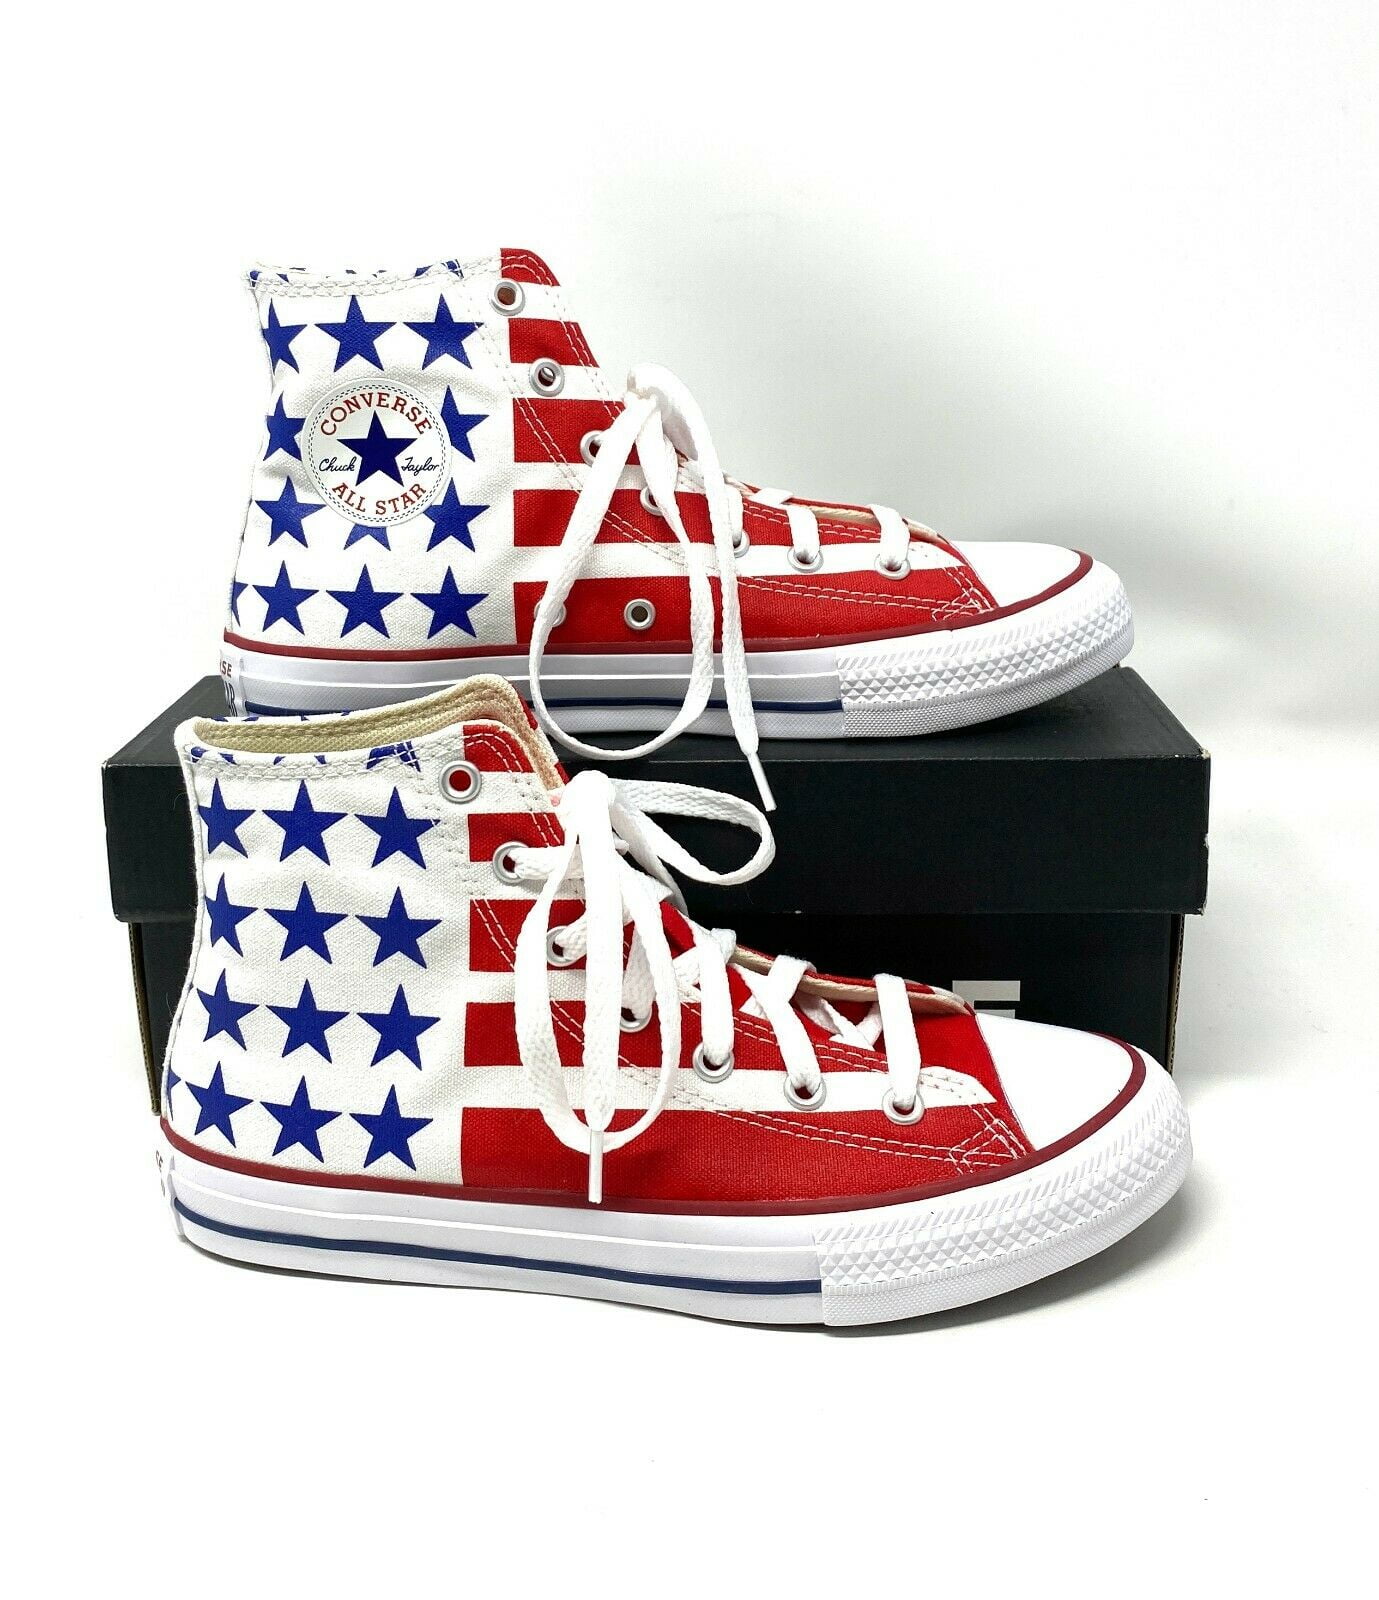 AMERICAN PIPELINER FLAG High Top Classic Canvas Fashion Sneaker Casual Walking Shoes